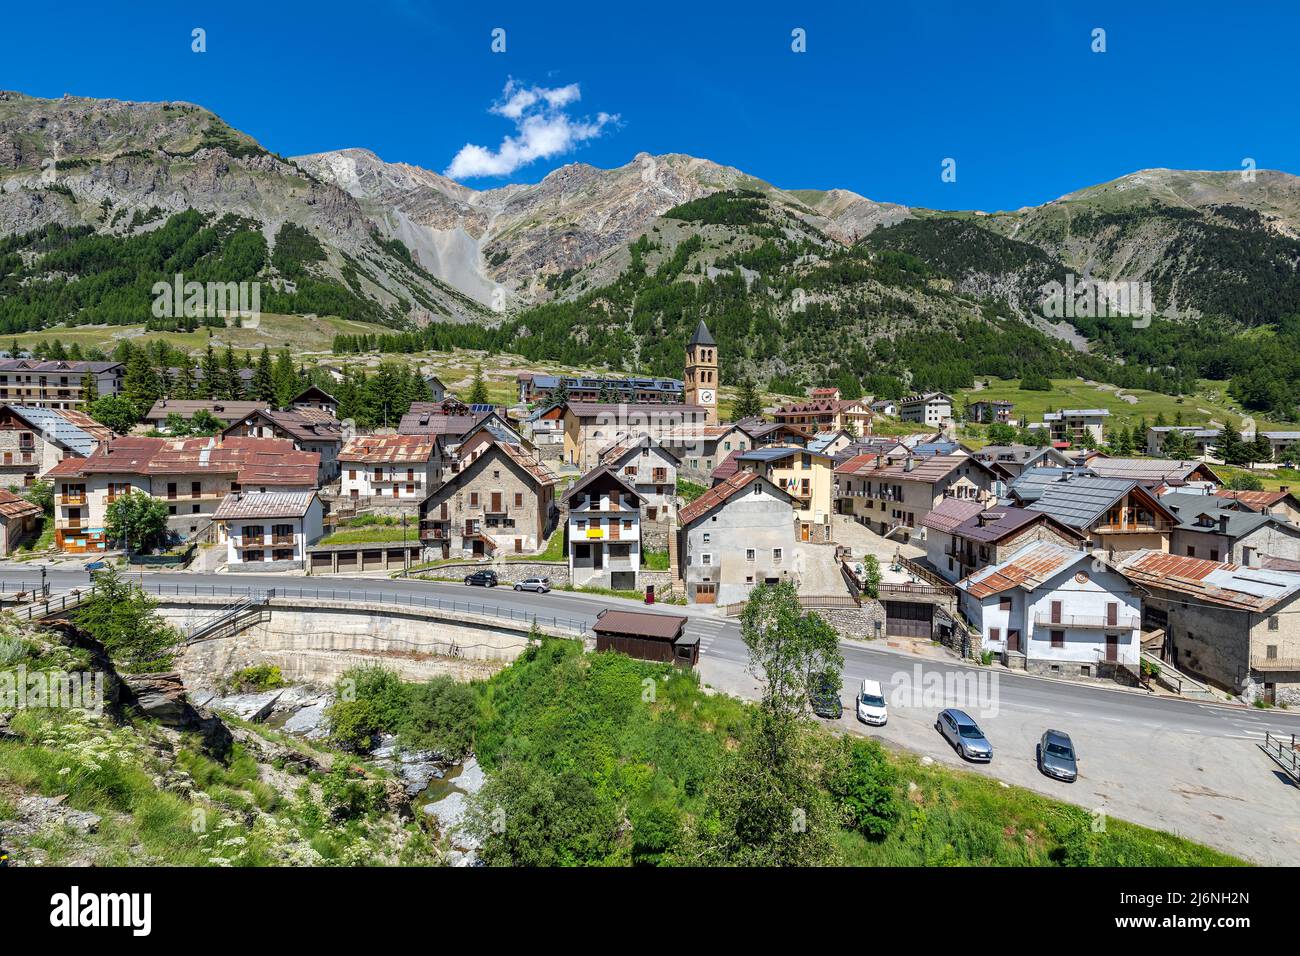 View from above of small alpine town of Bersezio at the foot of the mountains under blue sky in Piedmont, Northern Italy. Stock Photo